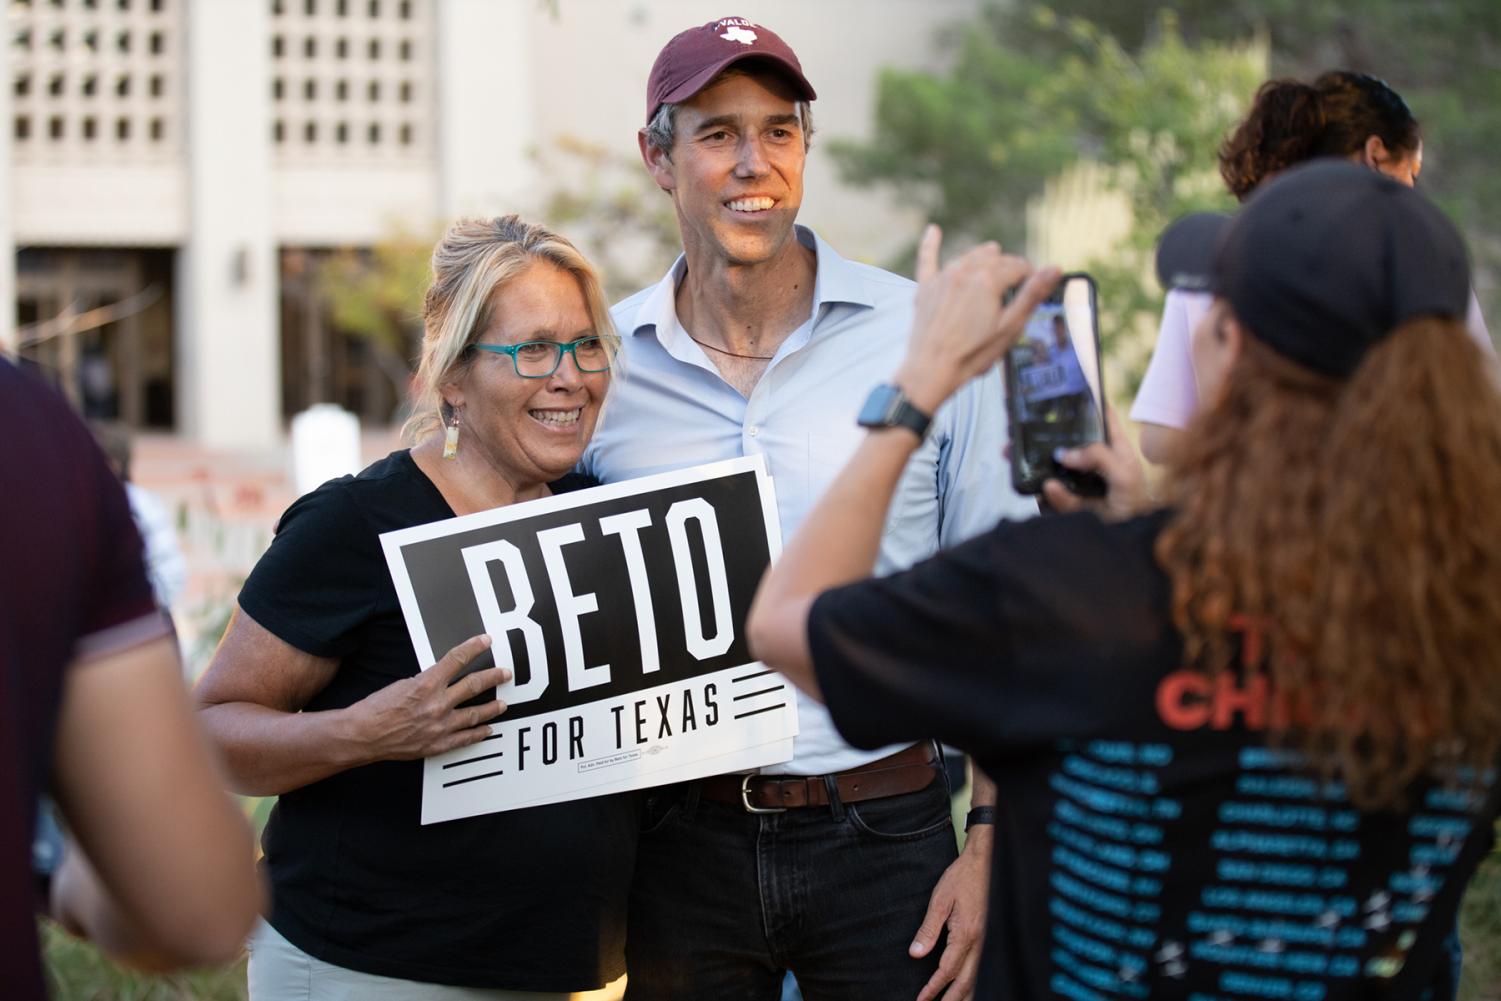 Beto+makes+final+stop+at+UTEP+during+his+college+tour